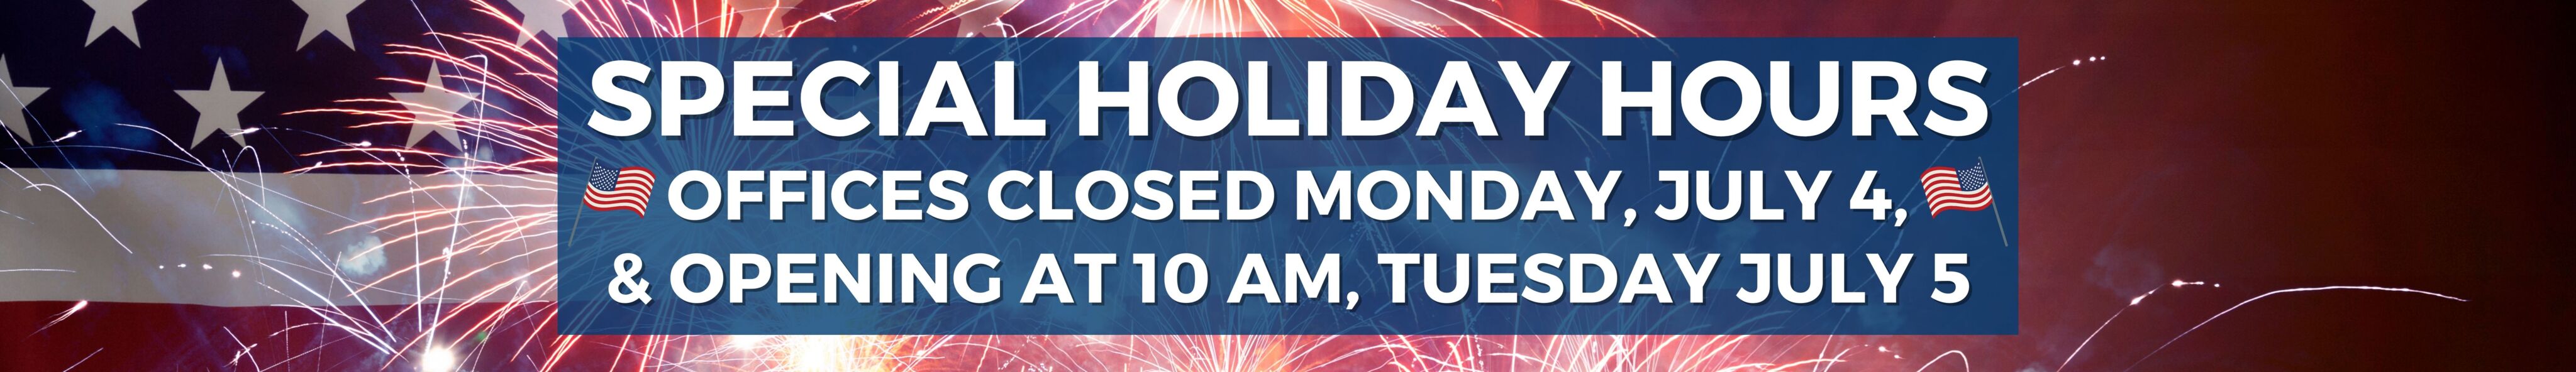 Special Holiday Hours - Offices Closed Monday, July 4, & Opening at 10 AM Tuesday, July 5